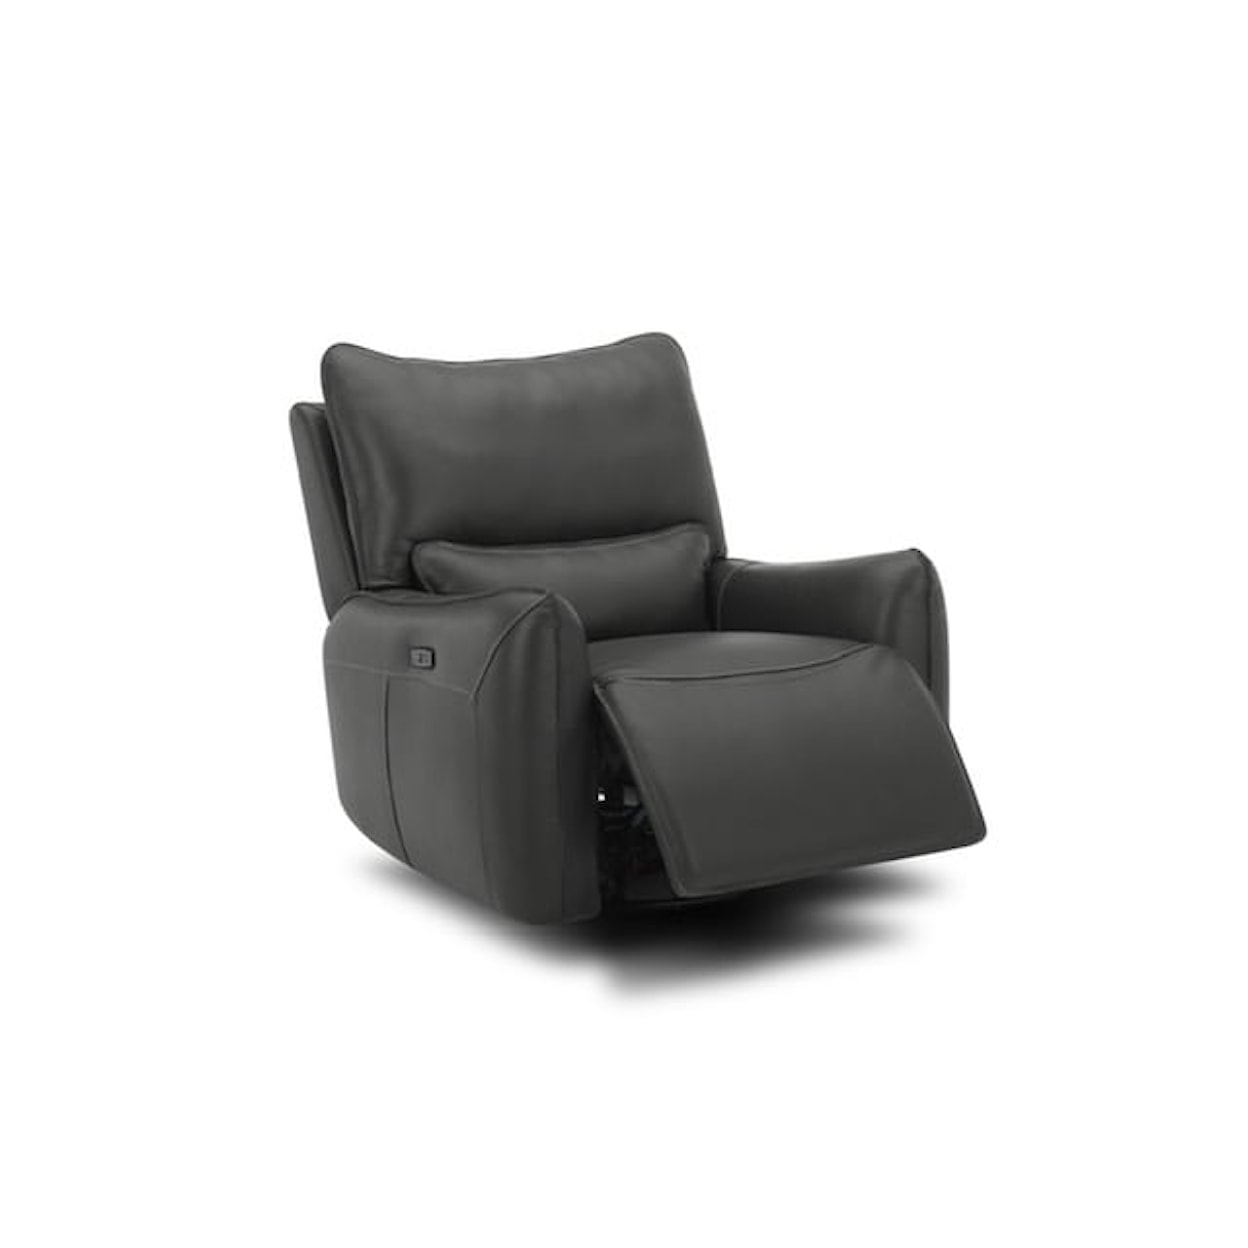 Kuka Home KM.582 582 Leather Dual Power recliner